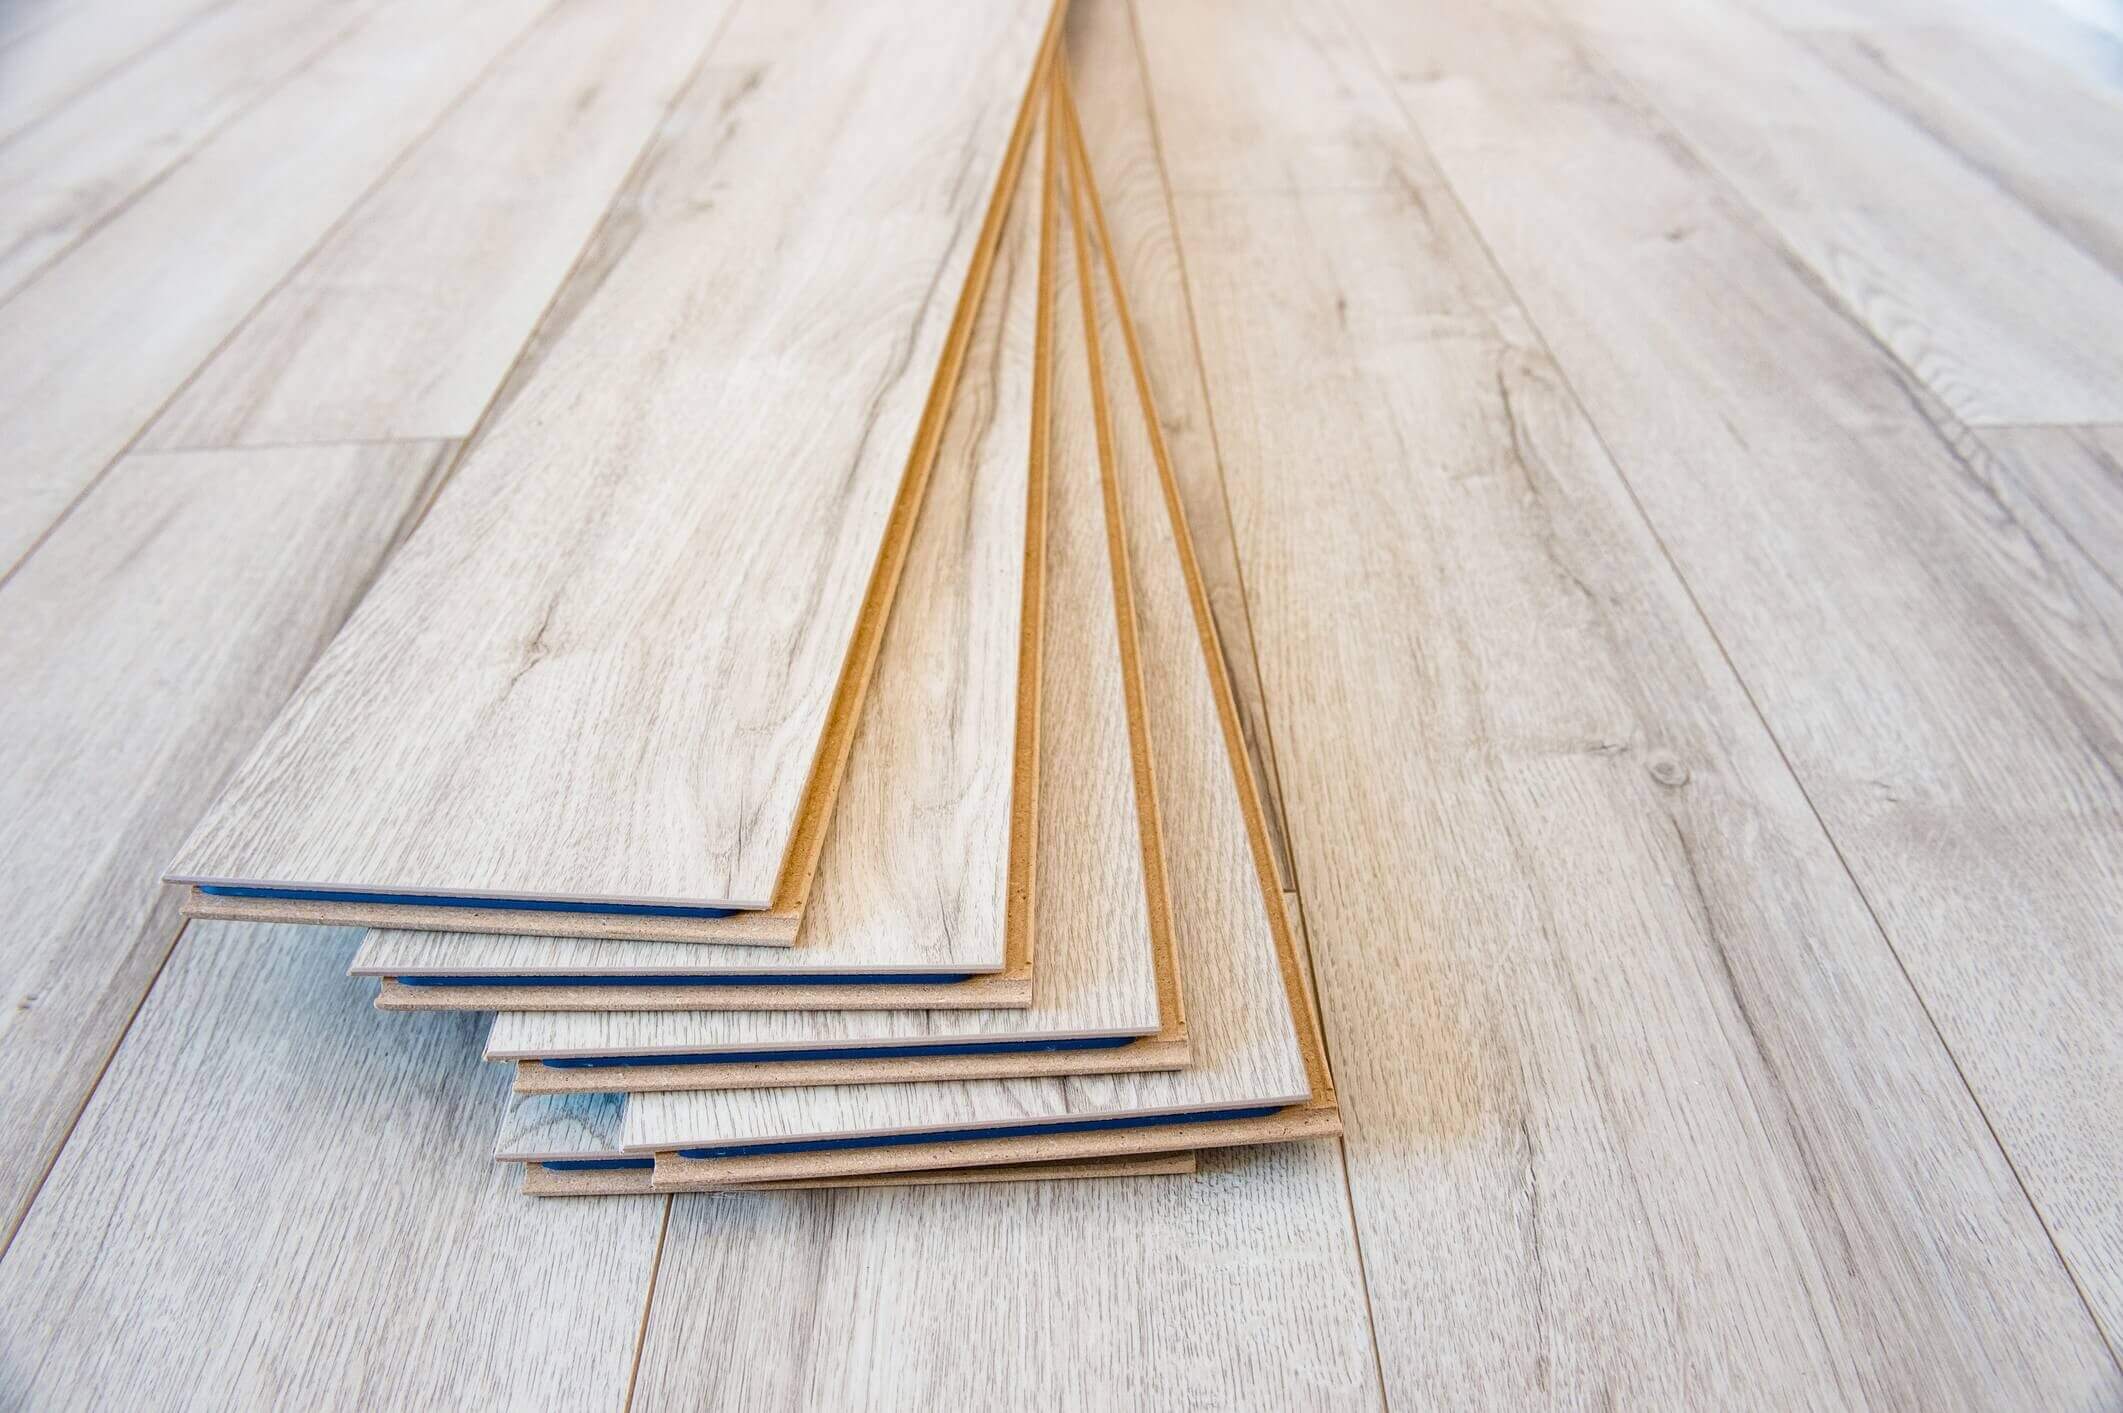 Leftover Laminate 5 Fun Projects You Can Do